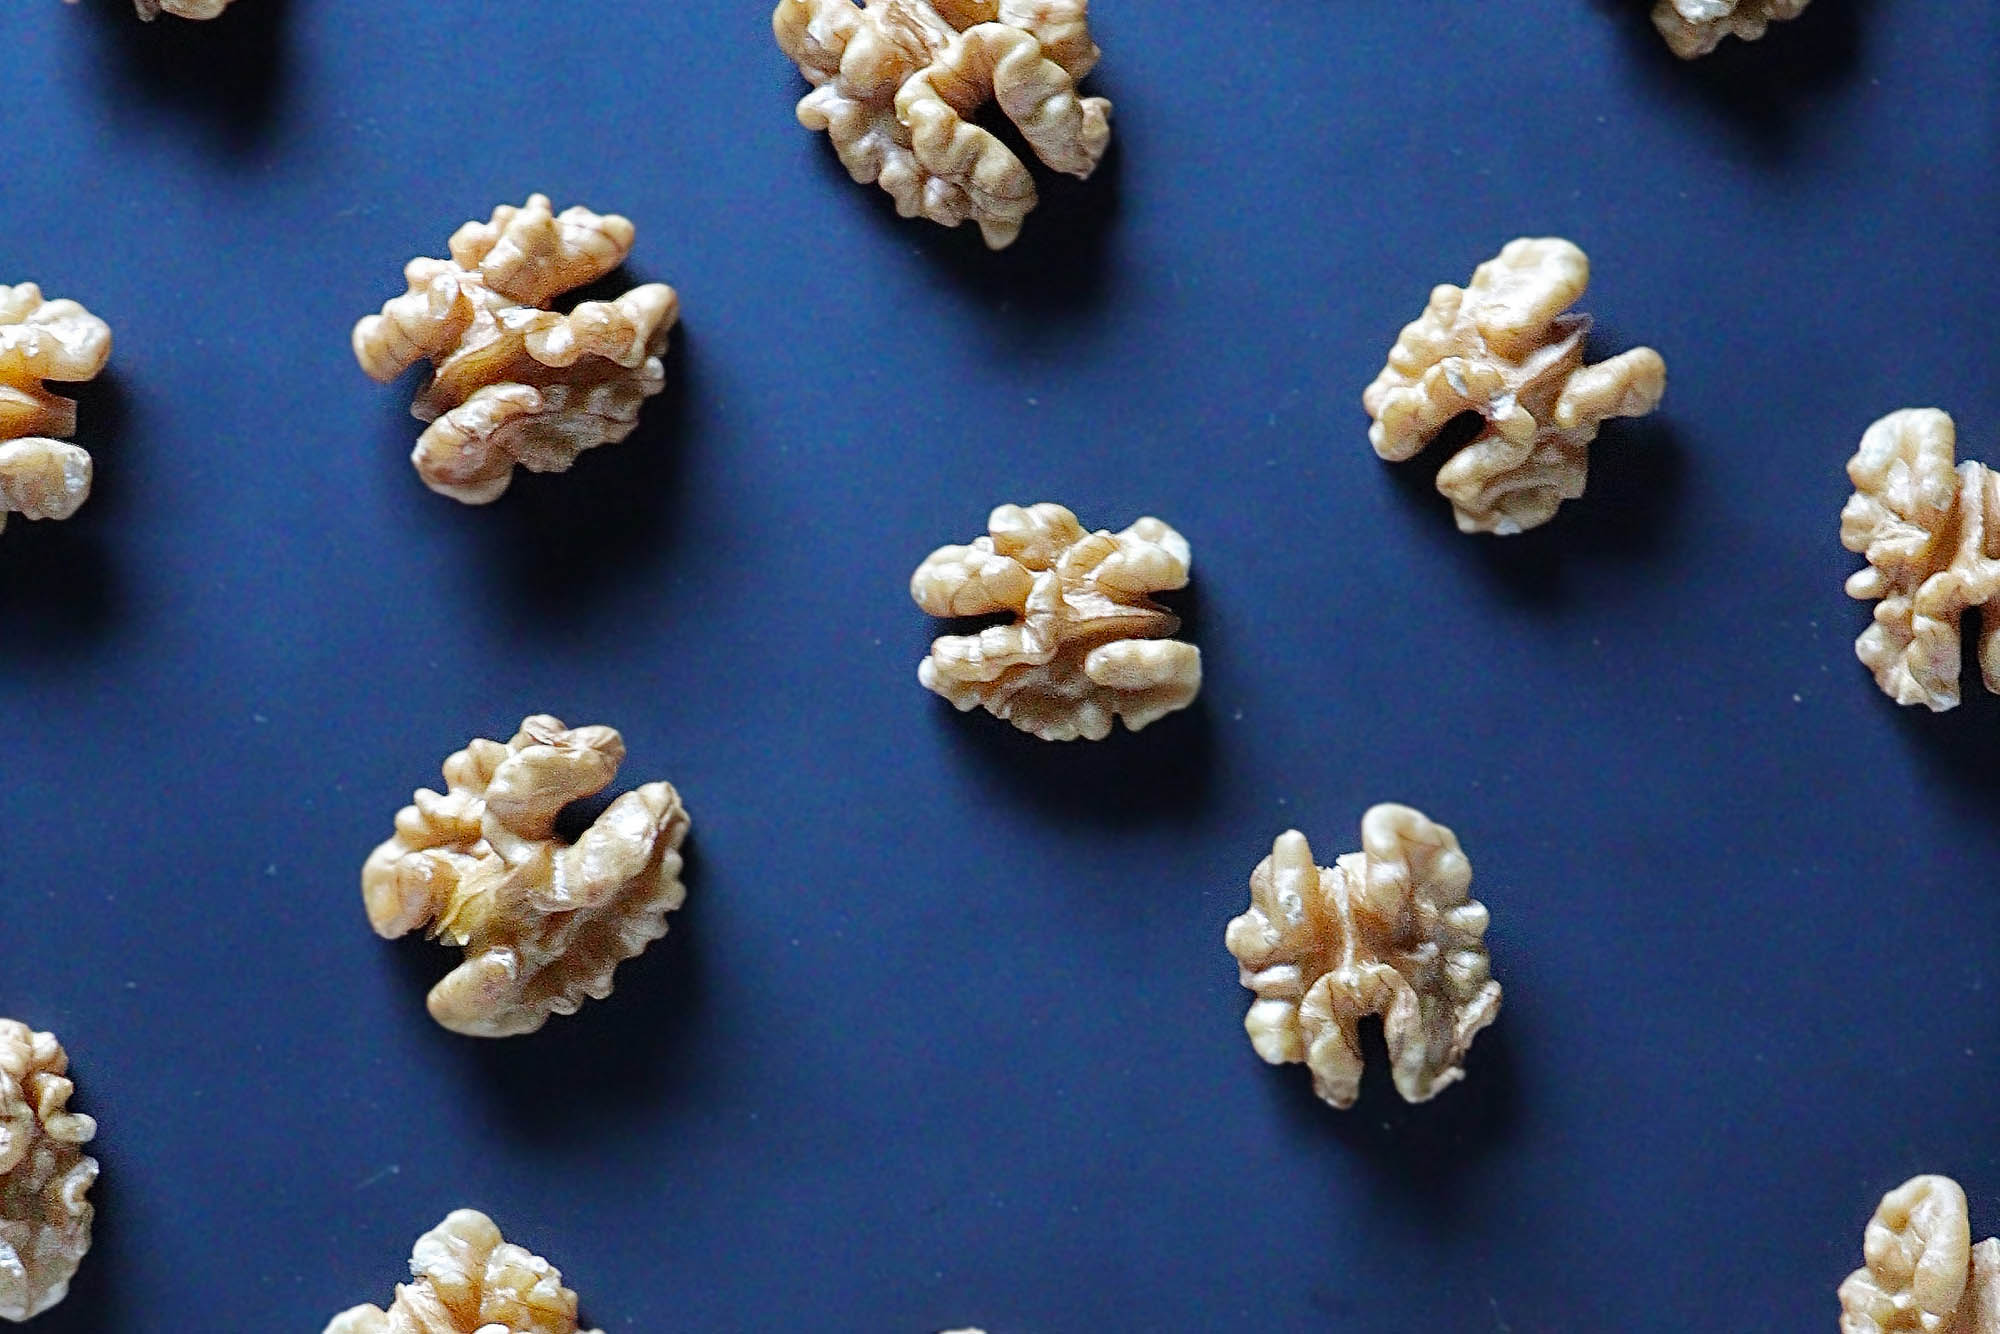 Walnuts spaced out on a dark blue background